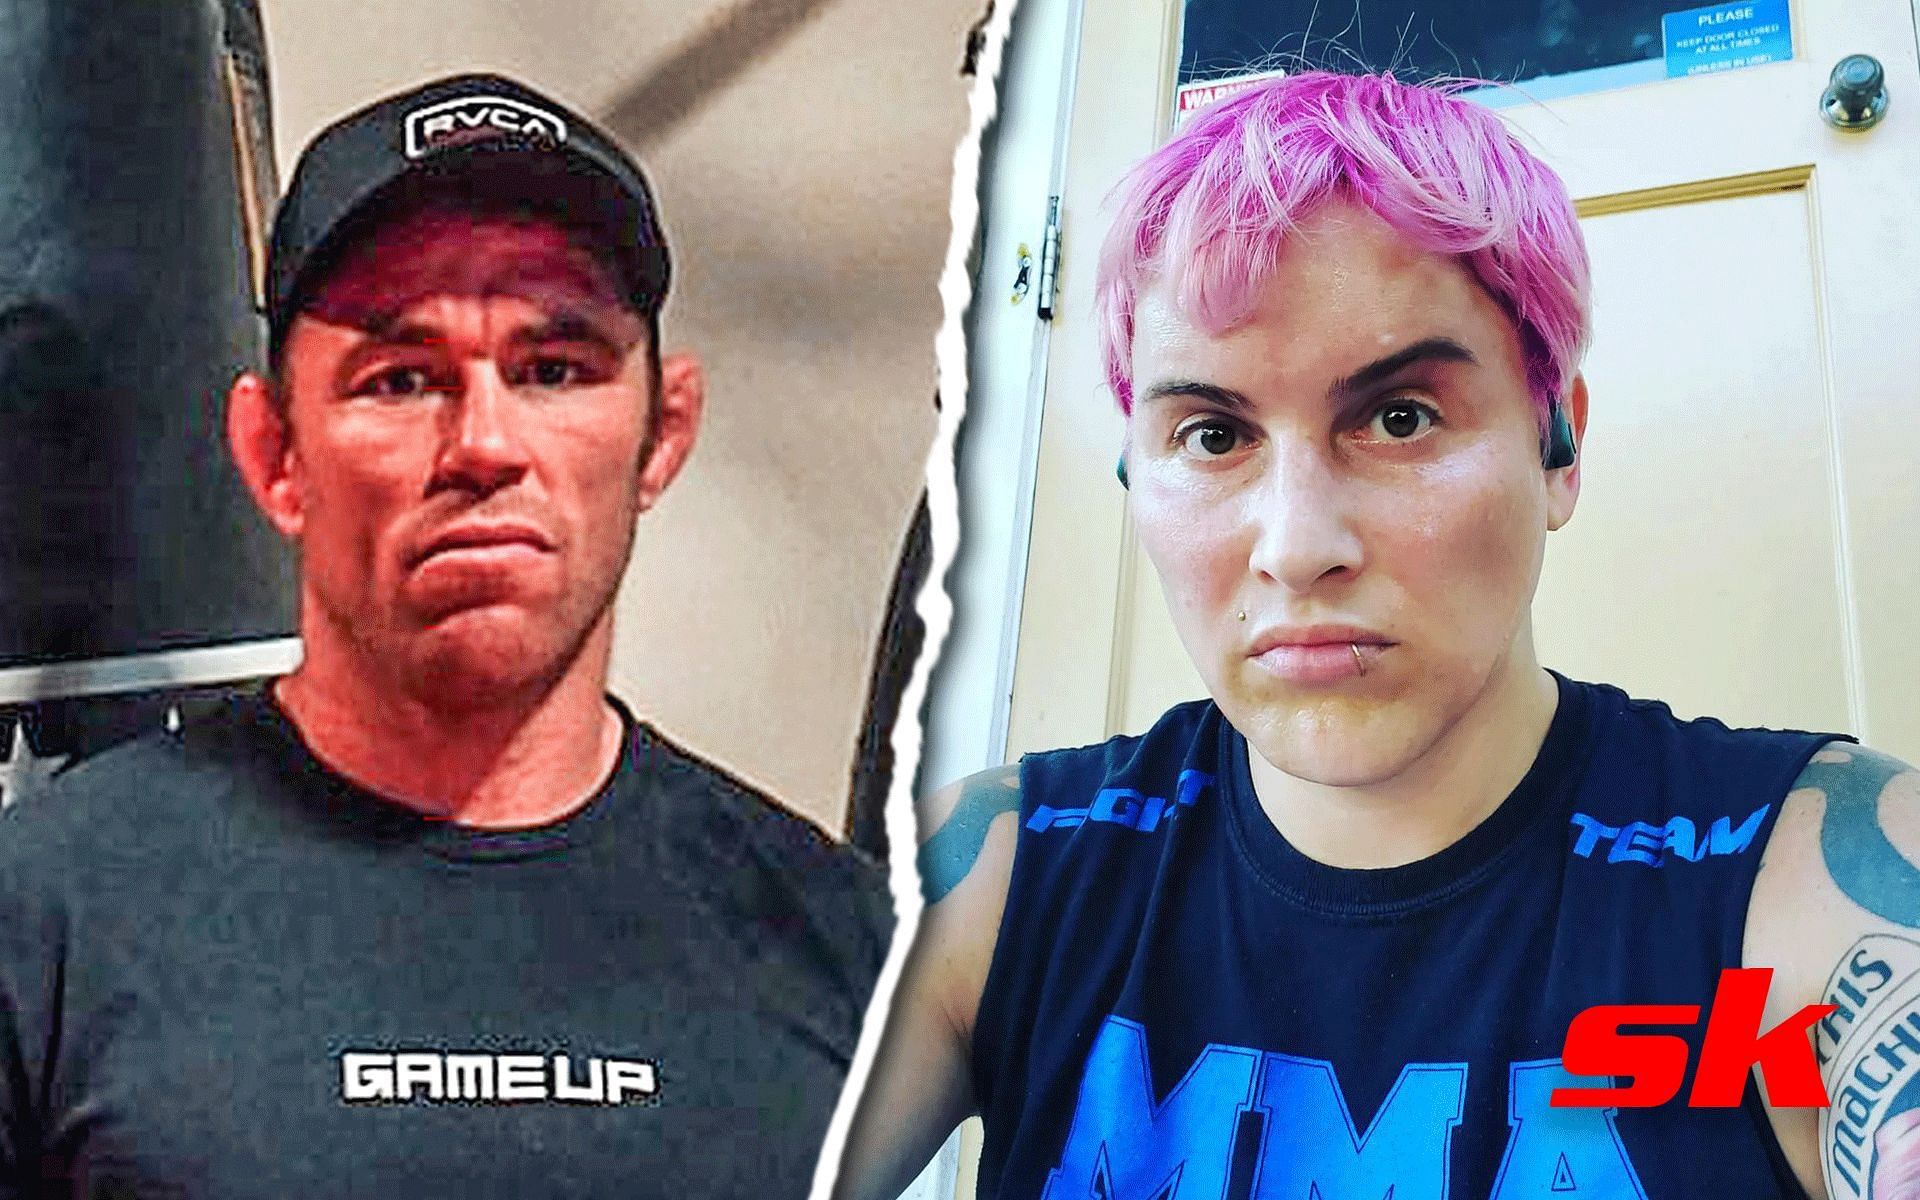 Jake Shields (left) and Alana McLaughlin (right) [Image Credits: @jakeshields and @lady_feral on Instagram}